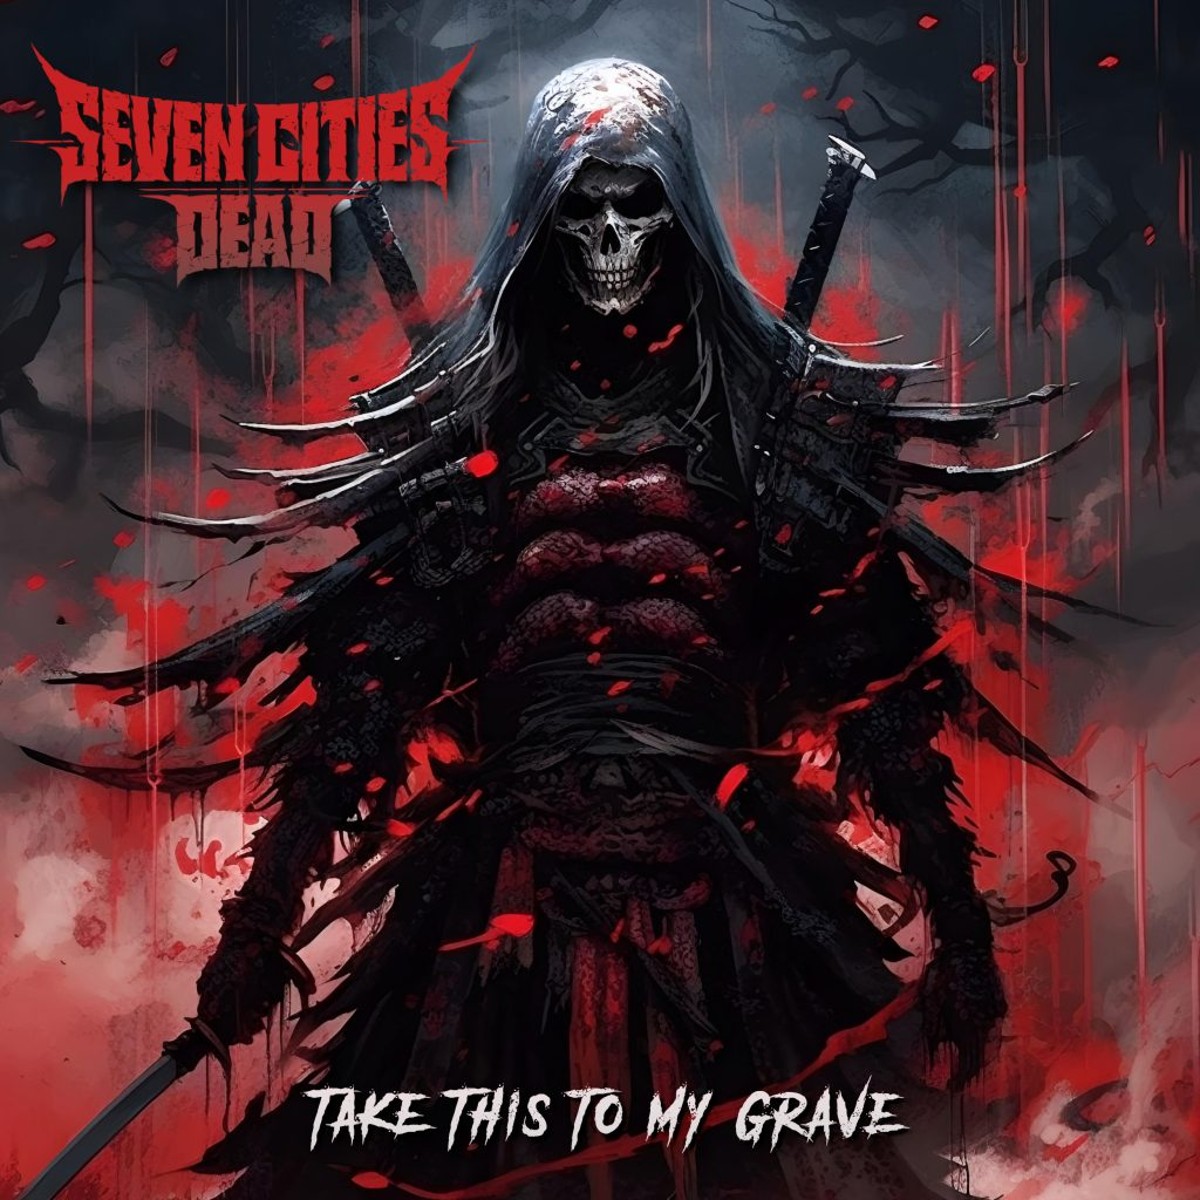 Seven Cities Dead “Take This To My Grave” (ft. Josh Gilbert) single artwork